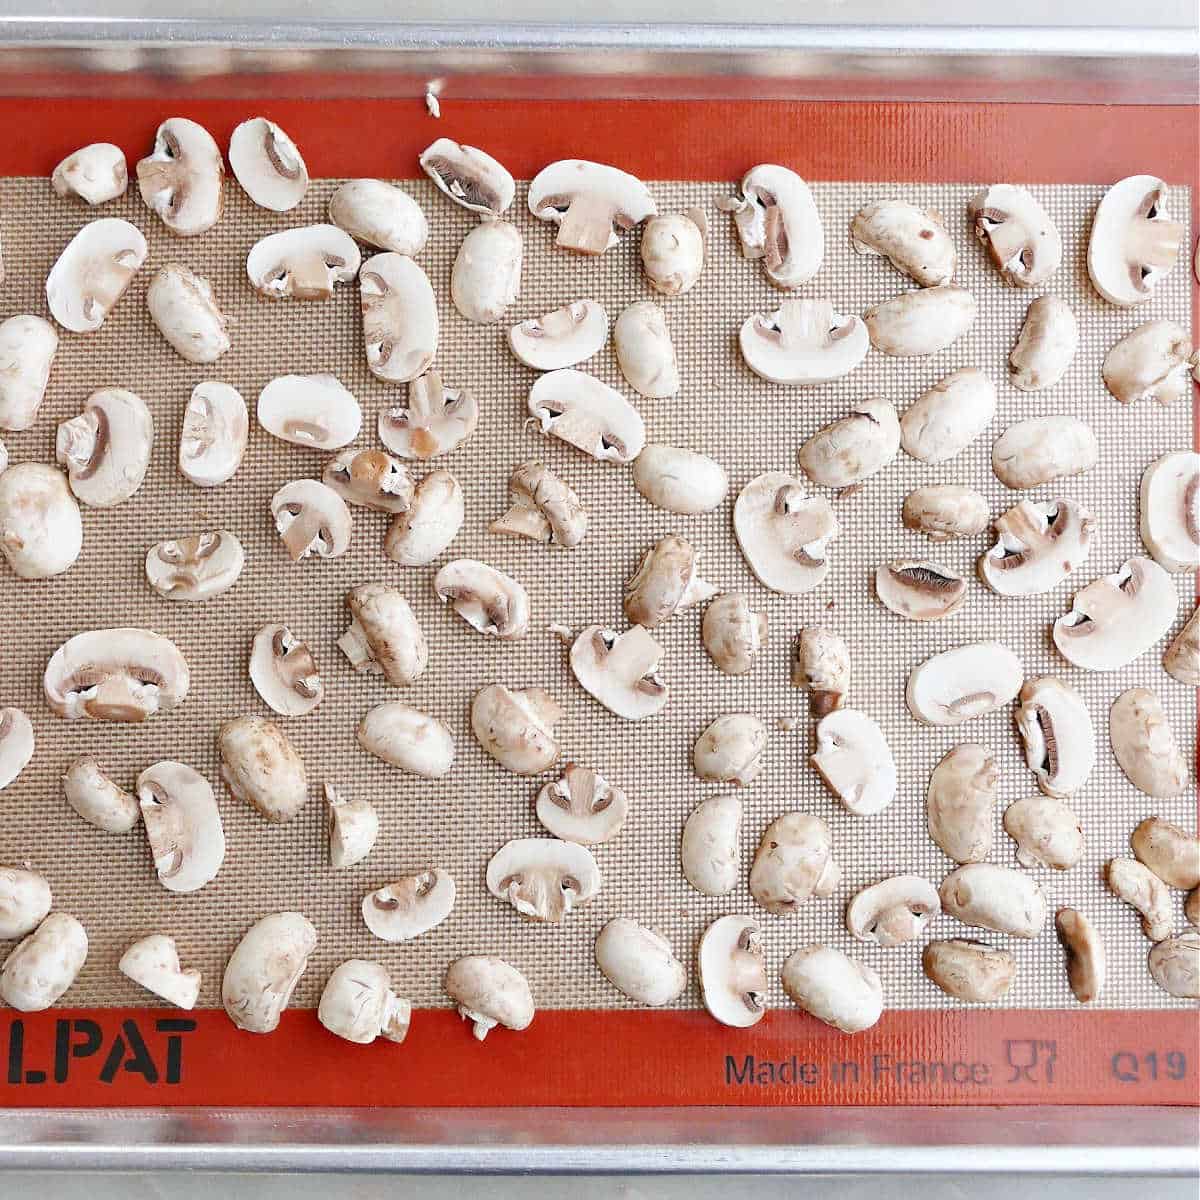 sliced mushrooms spread out on a lined baking sheet to be frozen